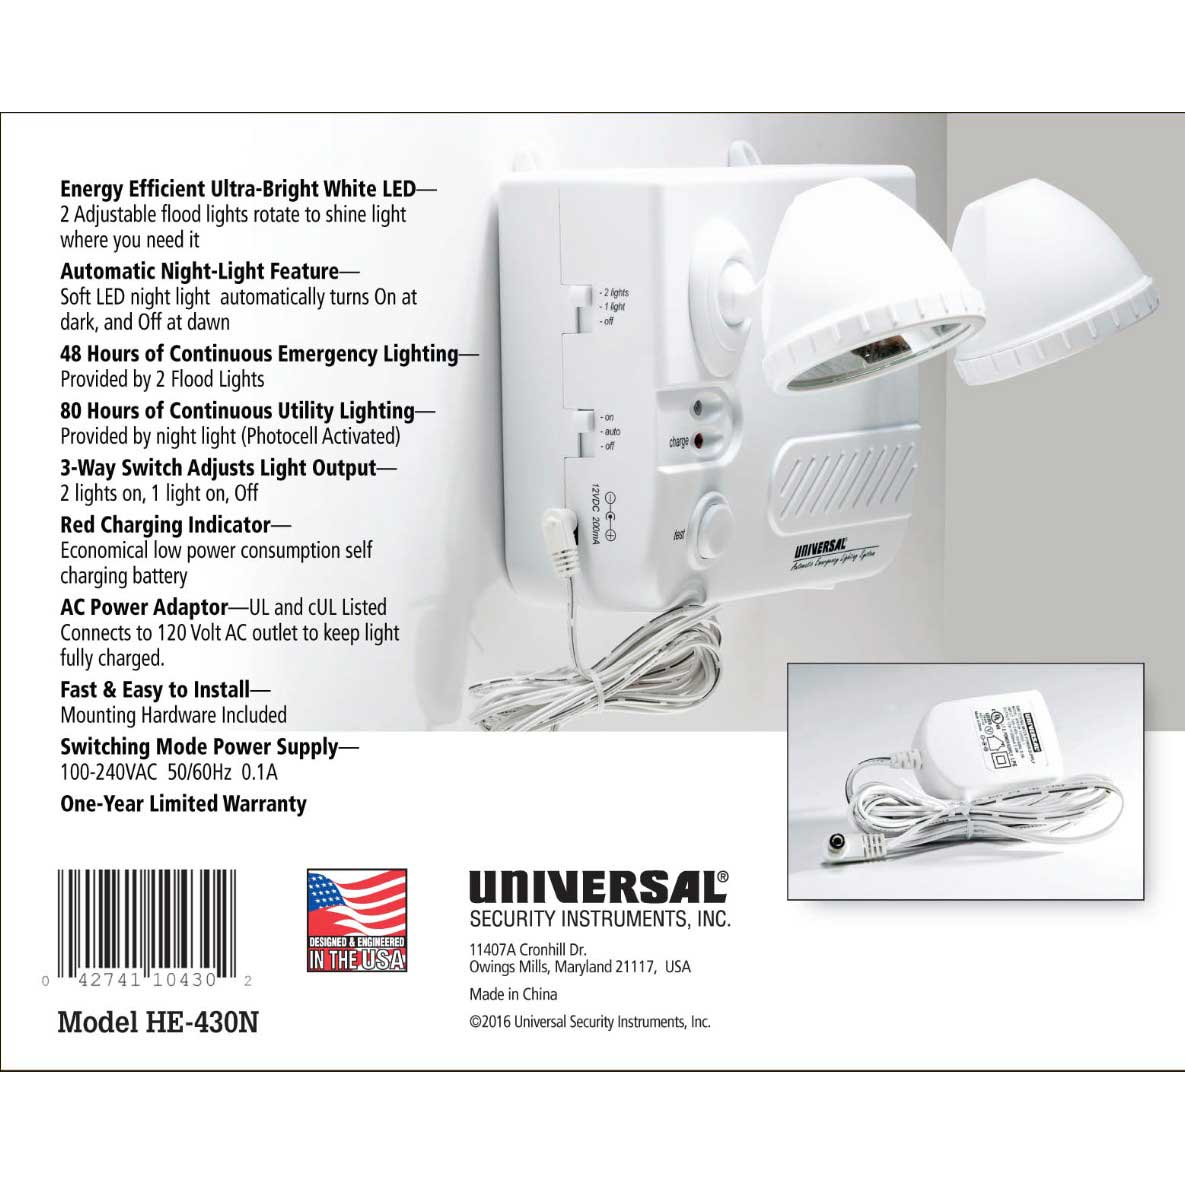 Universal Security Instruments HE-430N Automatic Emergency Lighting System